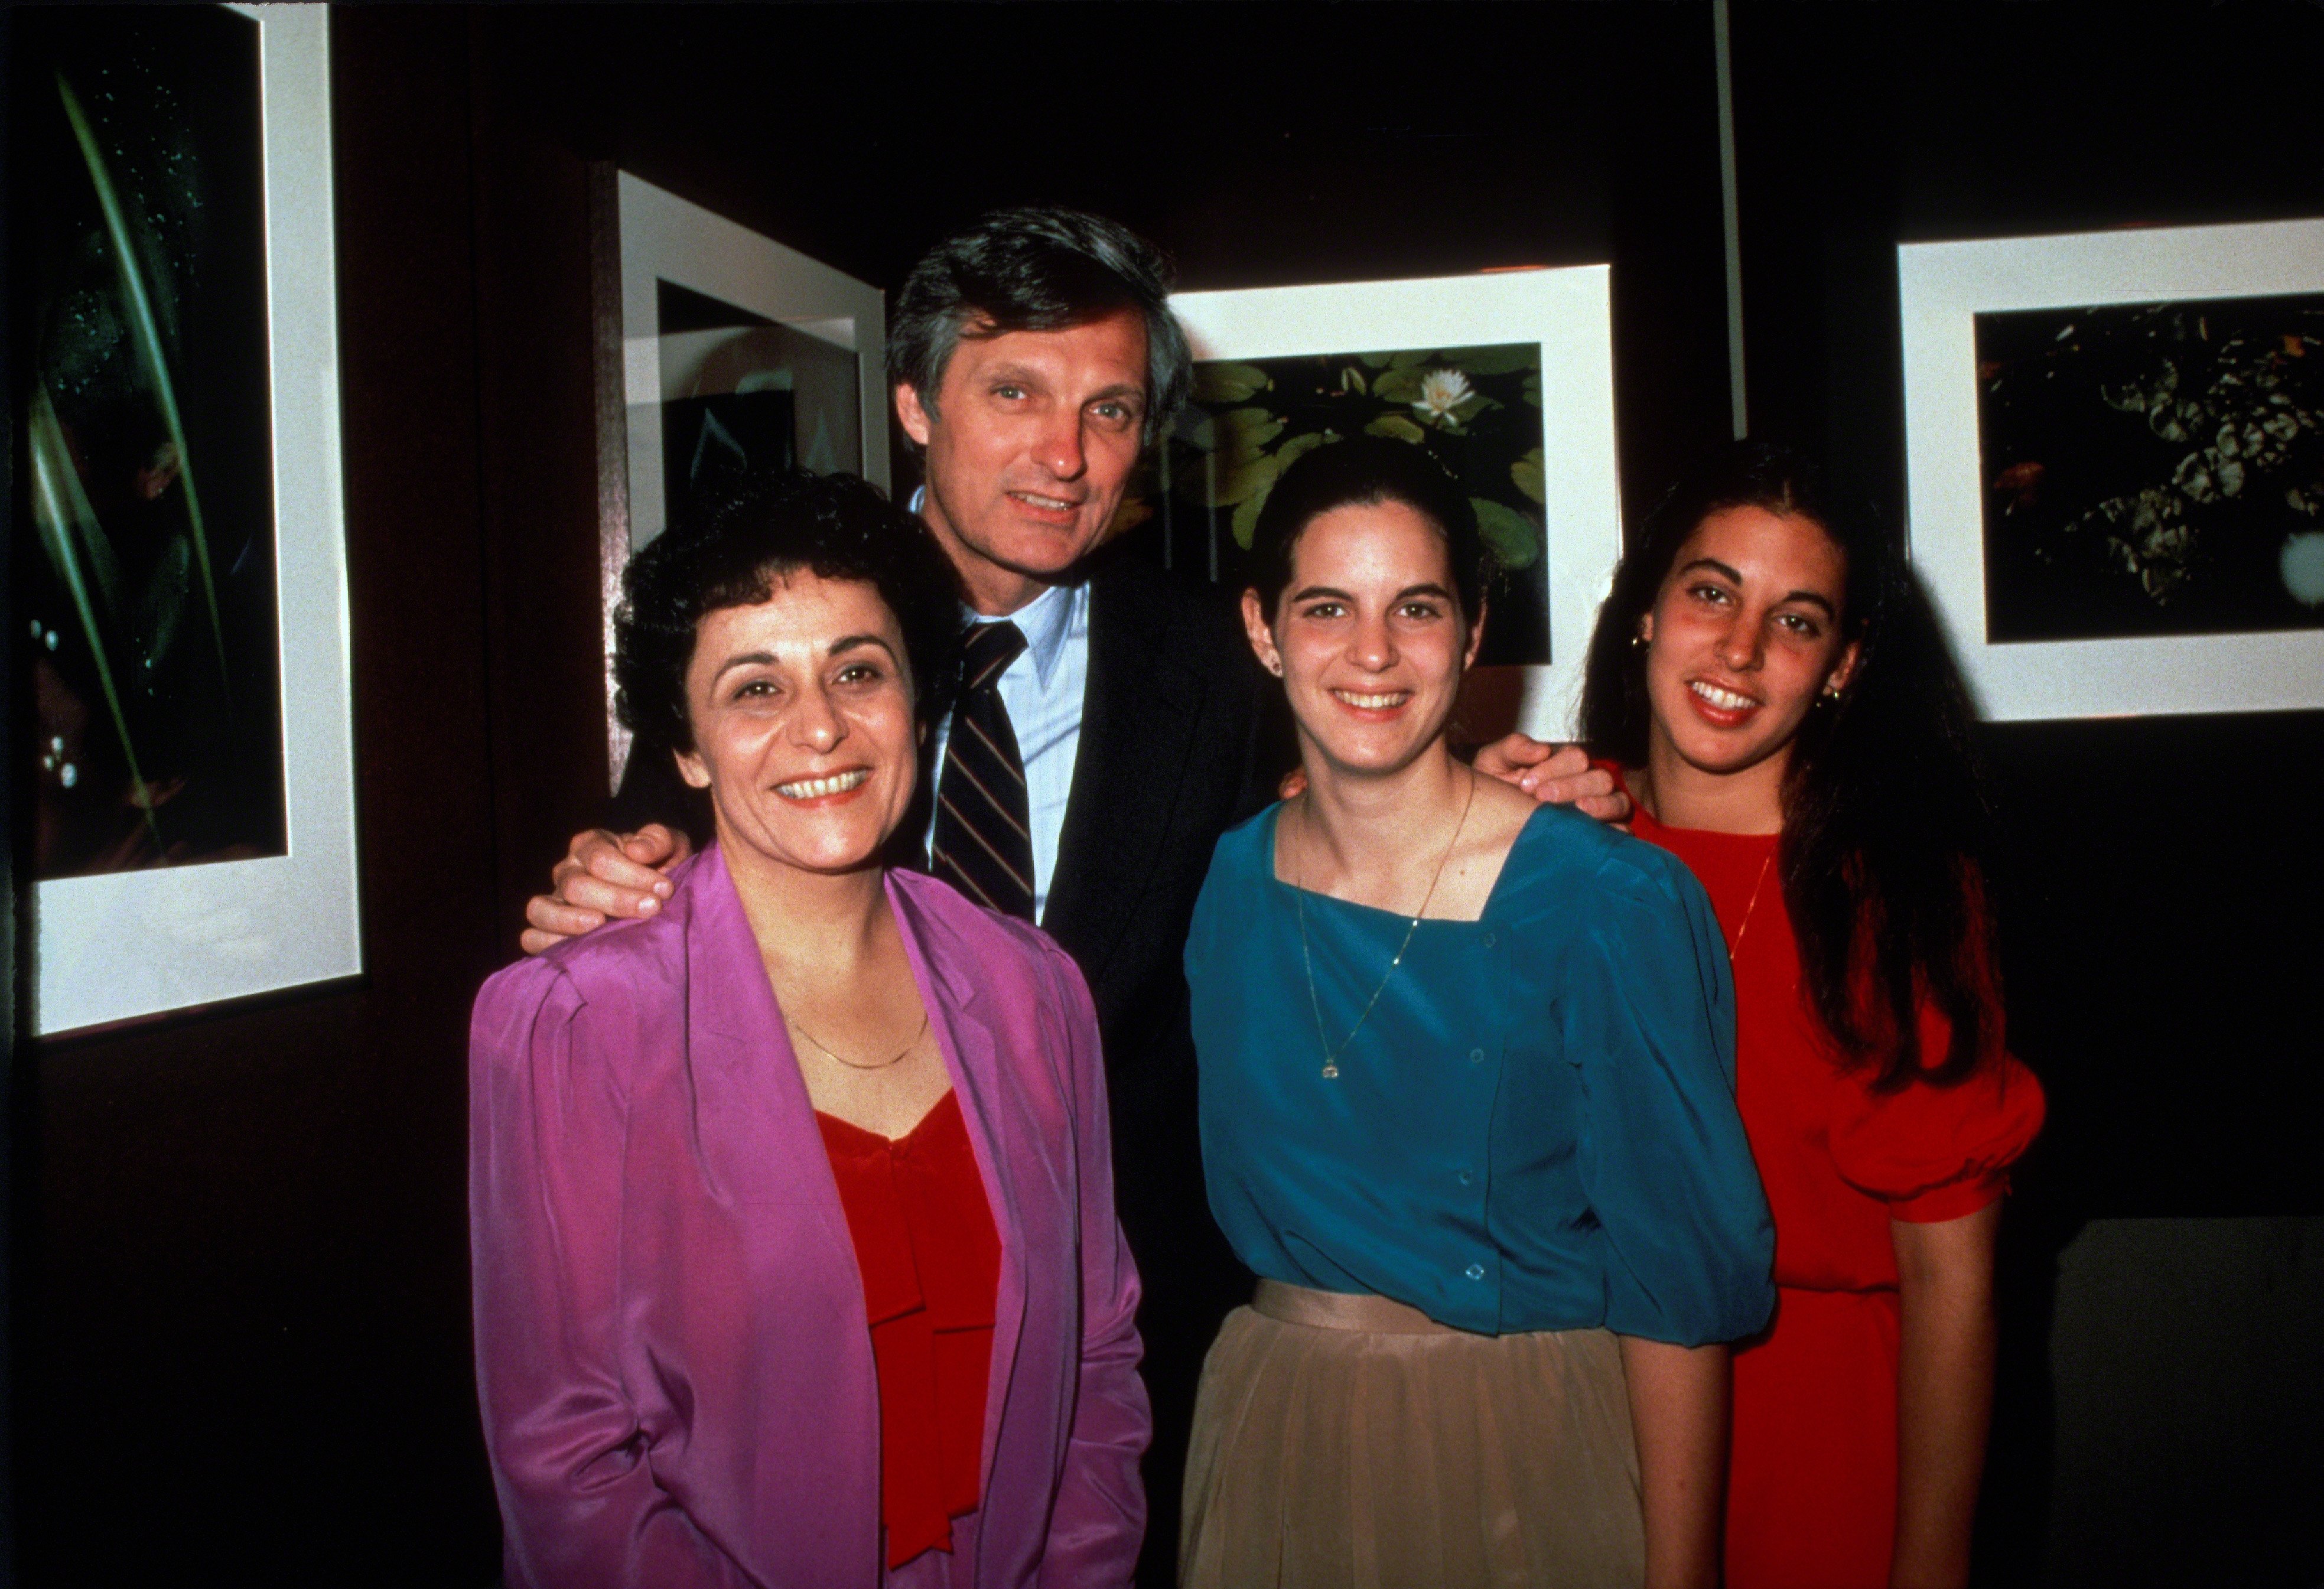 Alan Alda, his wife Arlene and two of their daughters in 1981, New York City. | Photo: Getty Images